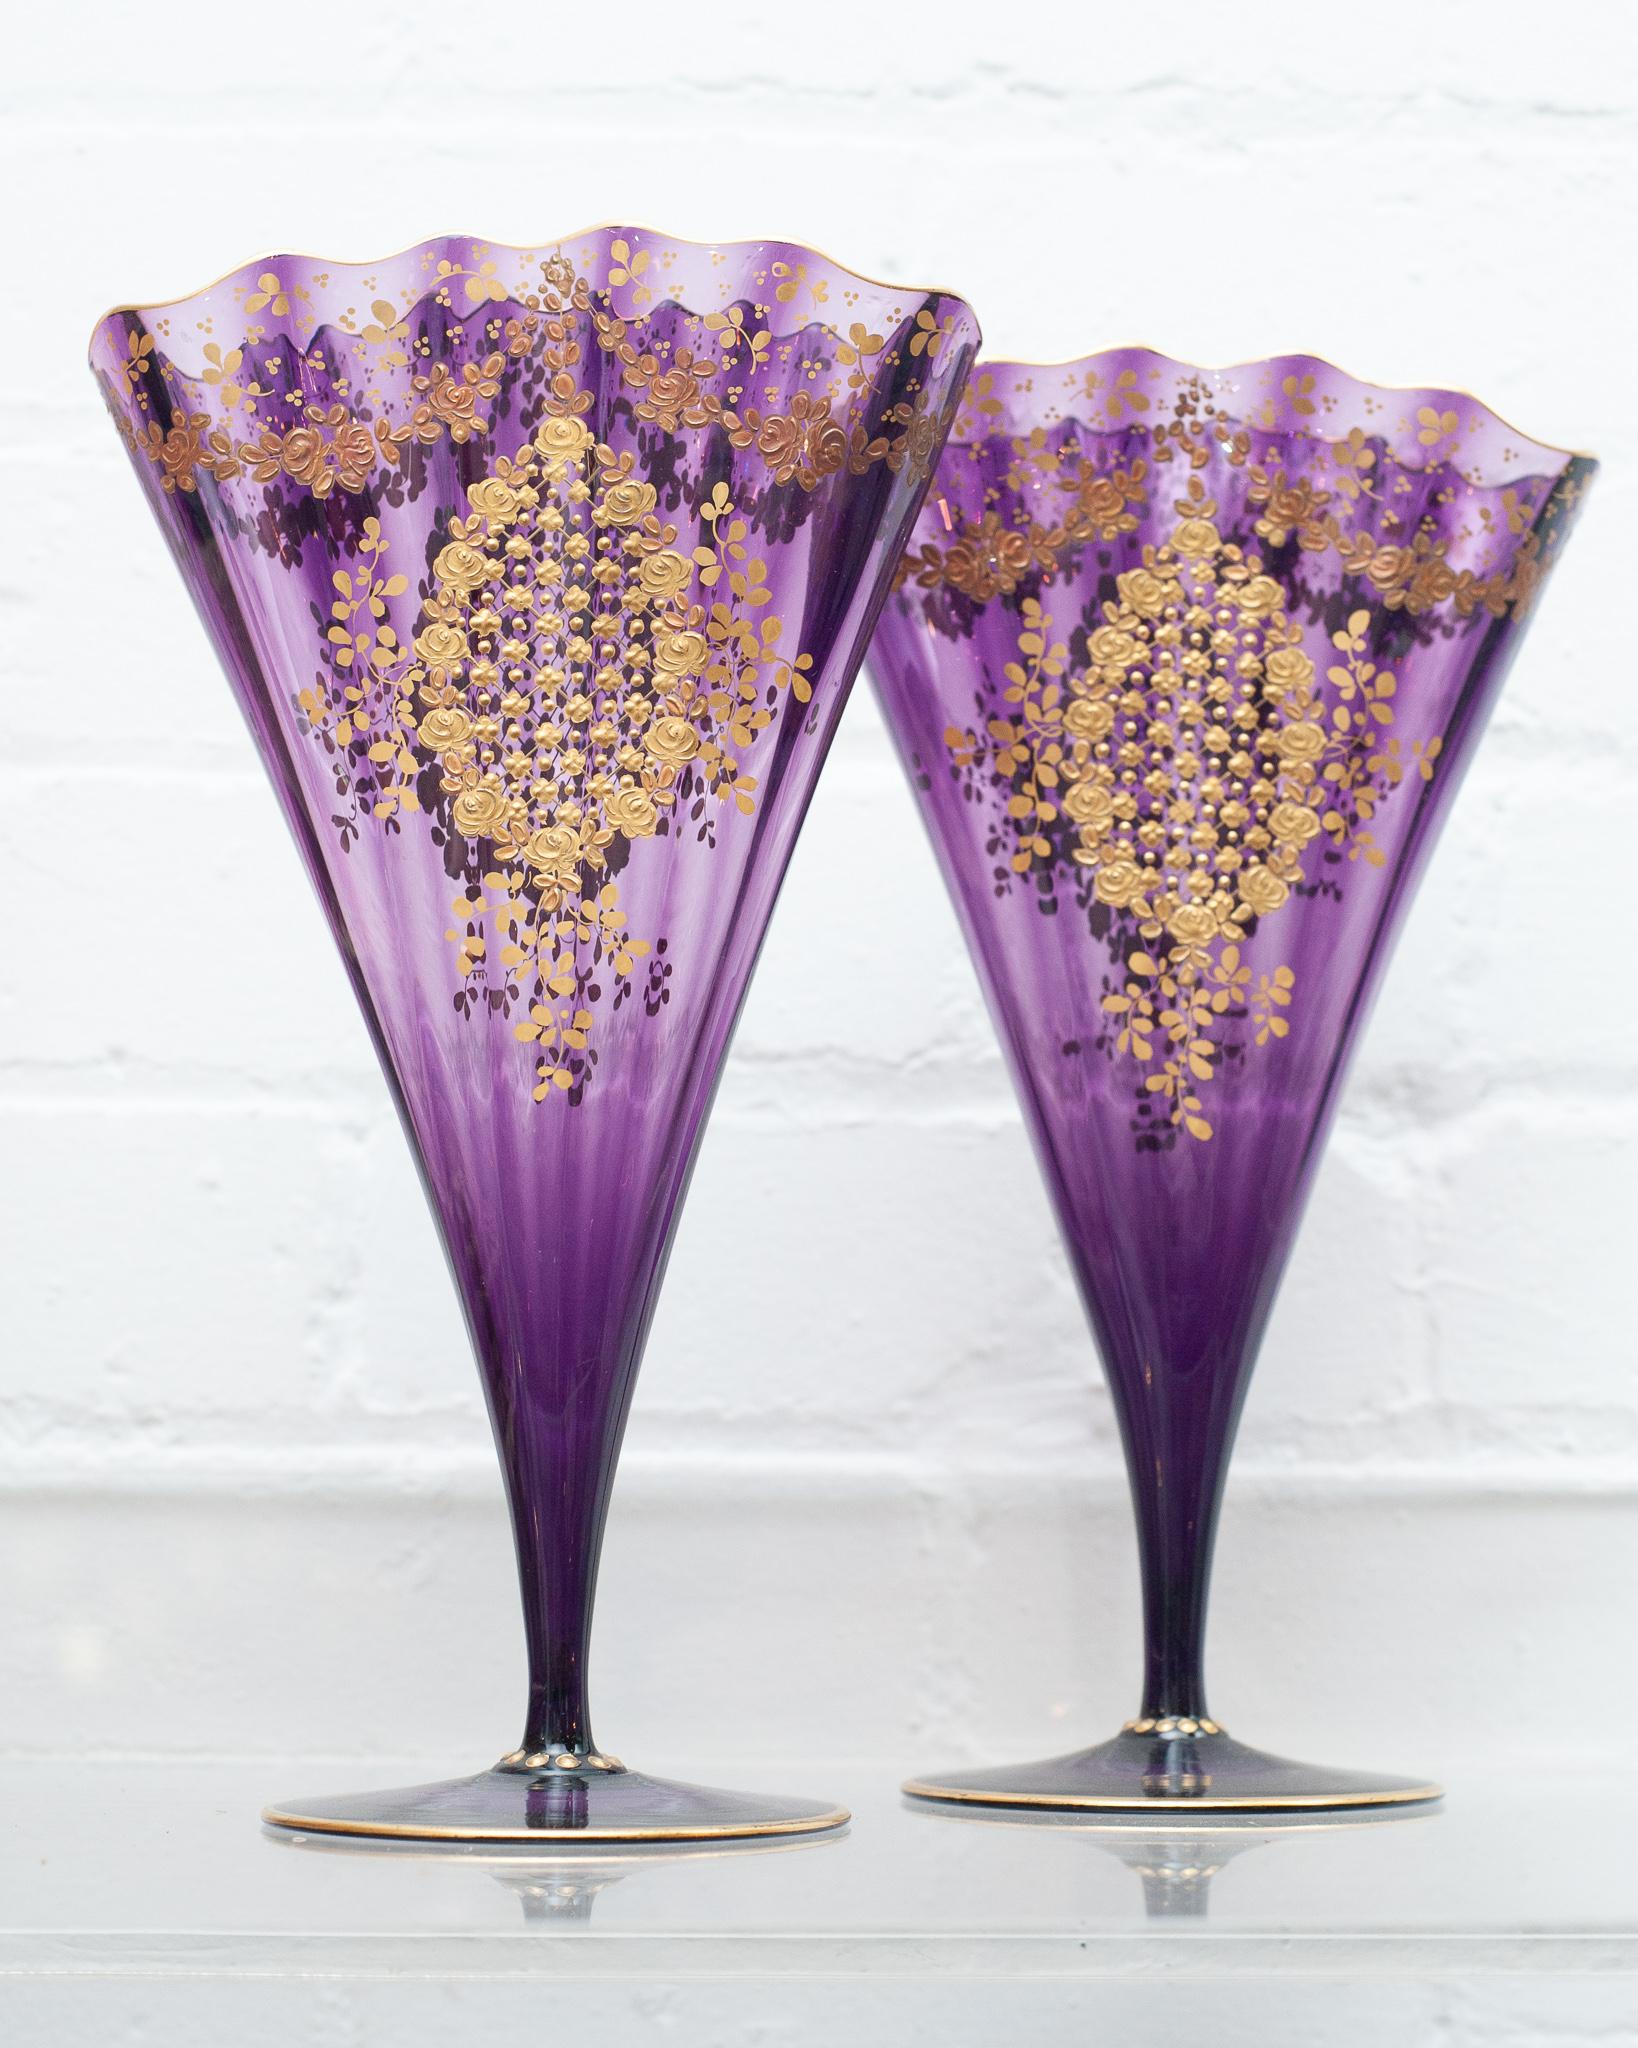 Czech Antique Pair of Moser Amethyst Fan Vases with Elaborate Gilding